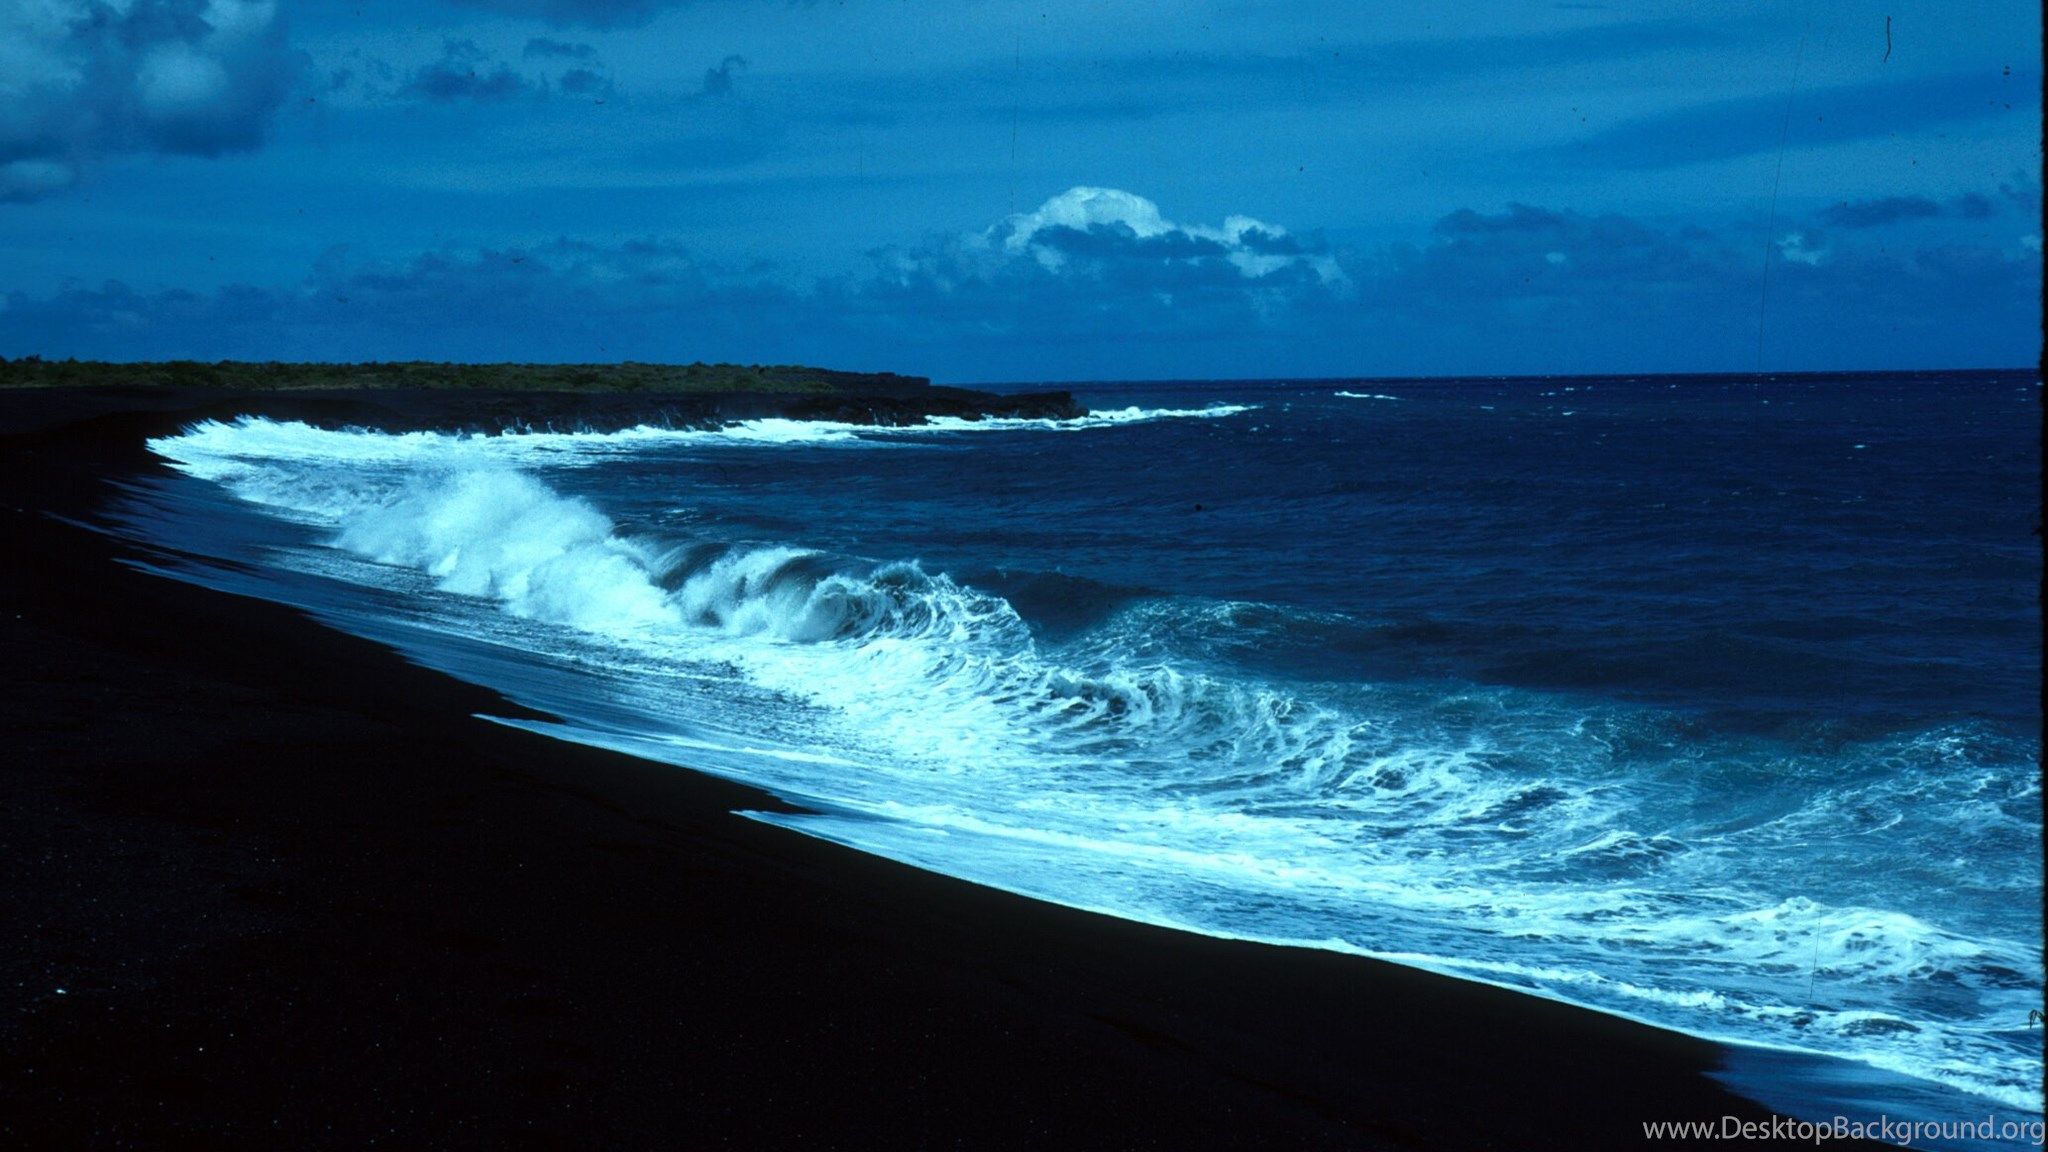 Beach Of Black Sand Wallpaper And Image Wallpaper, Picture. Desktop Background